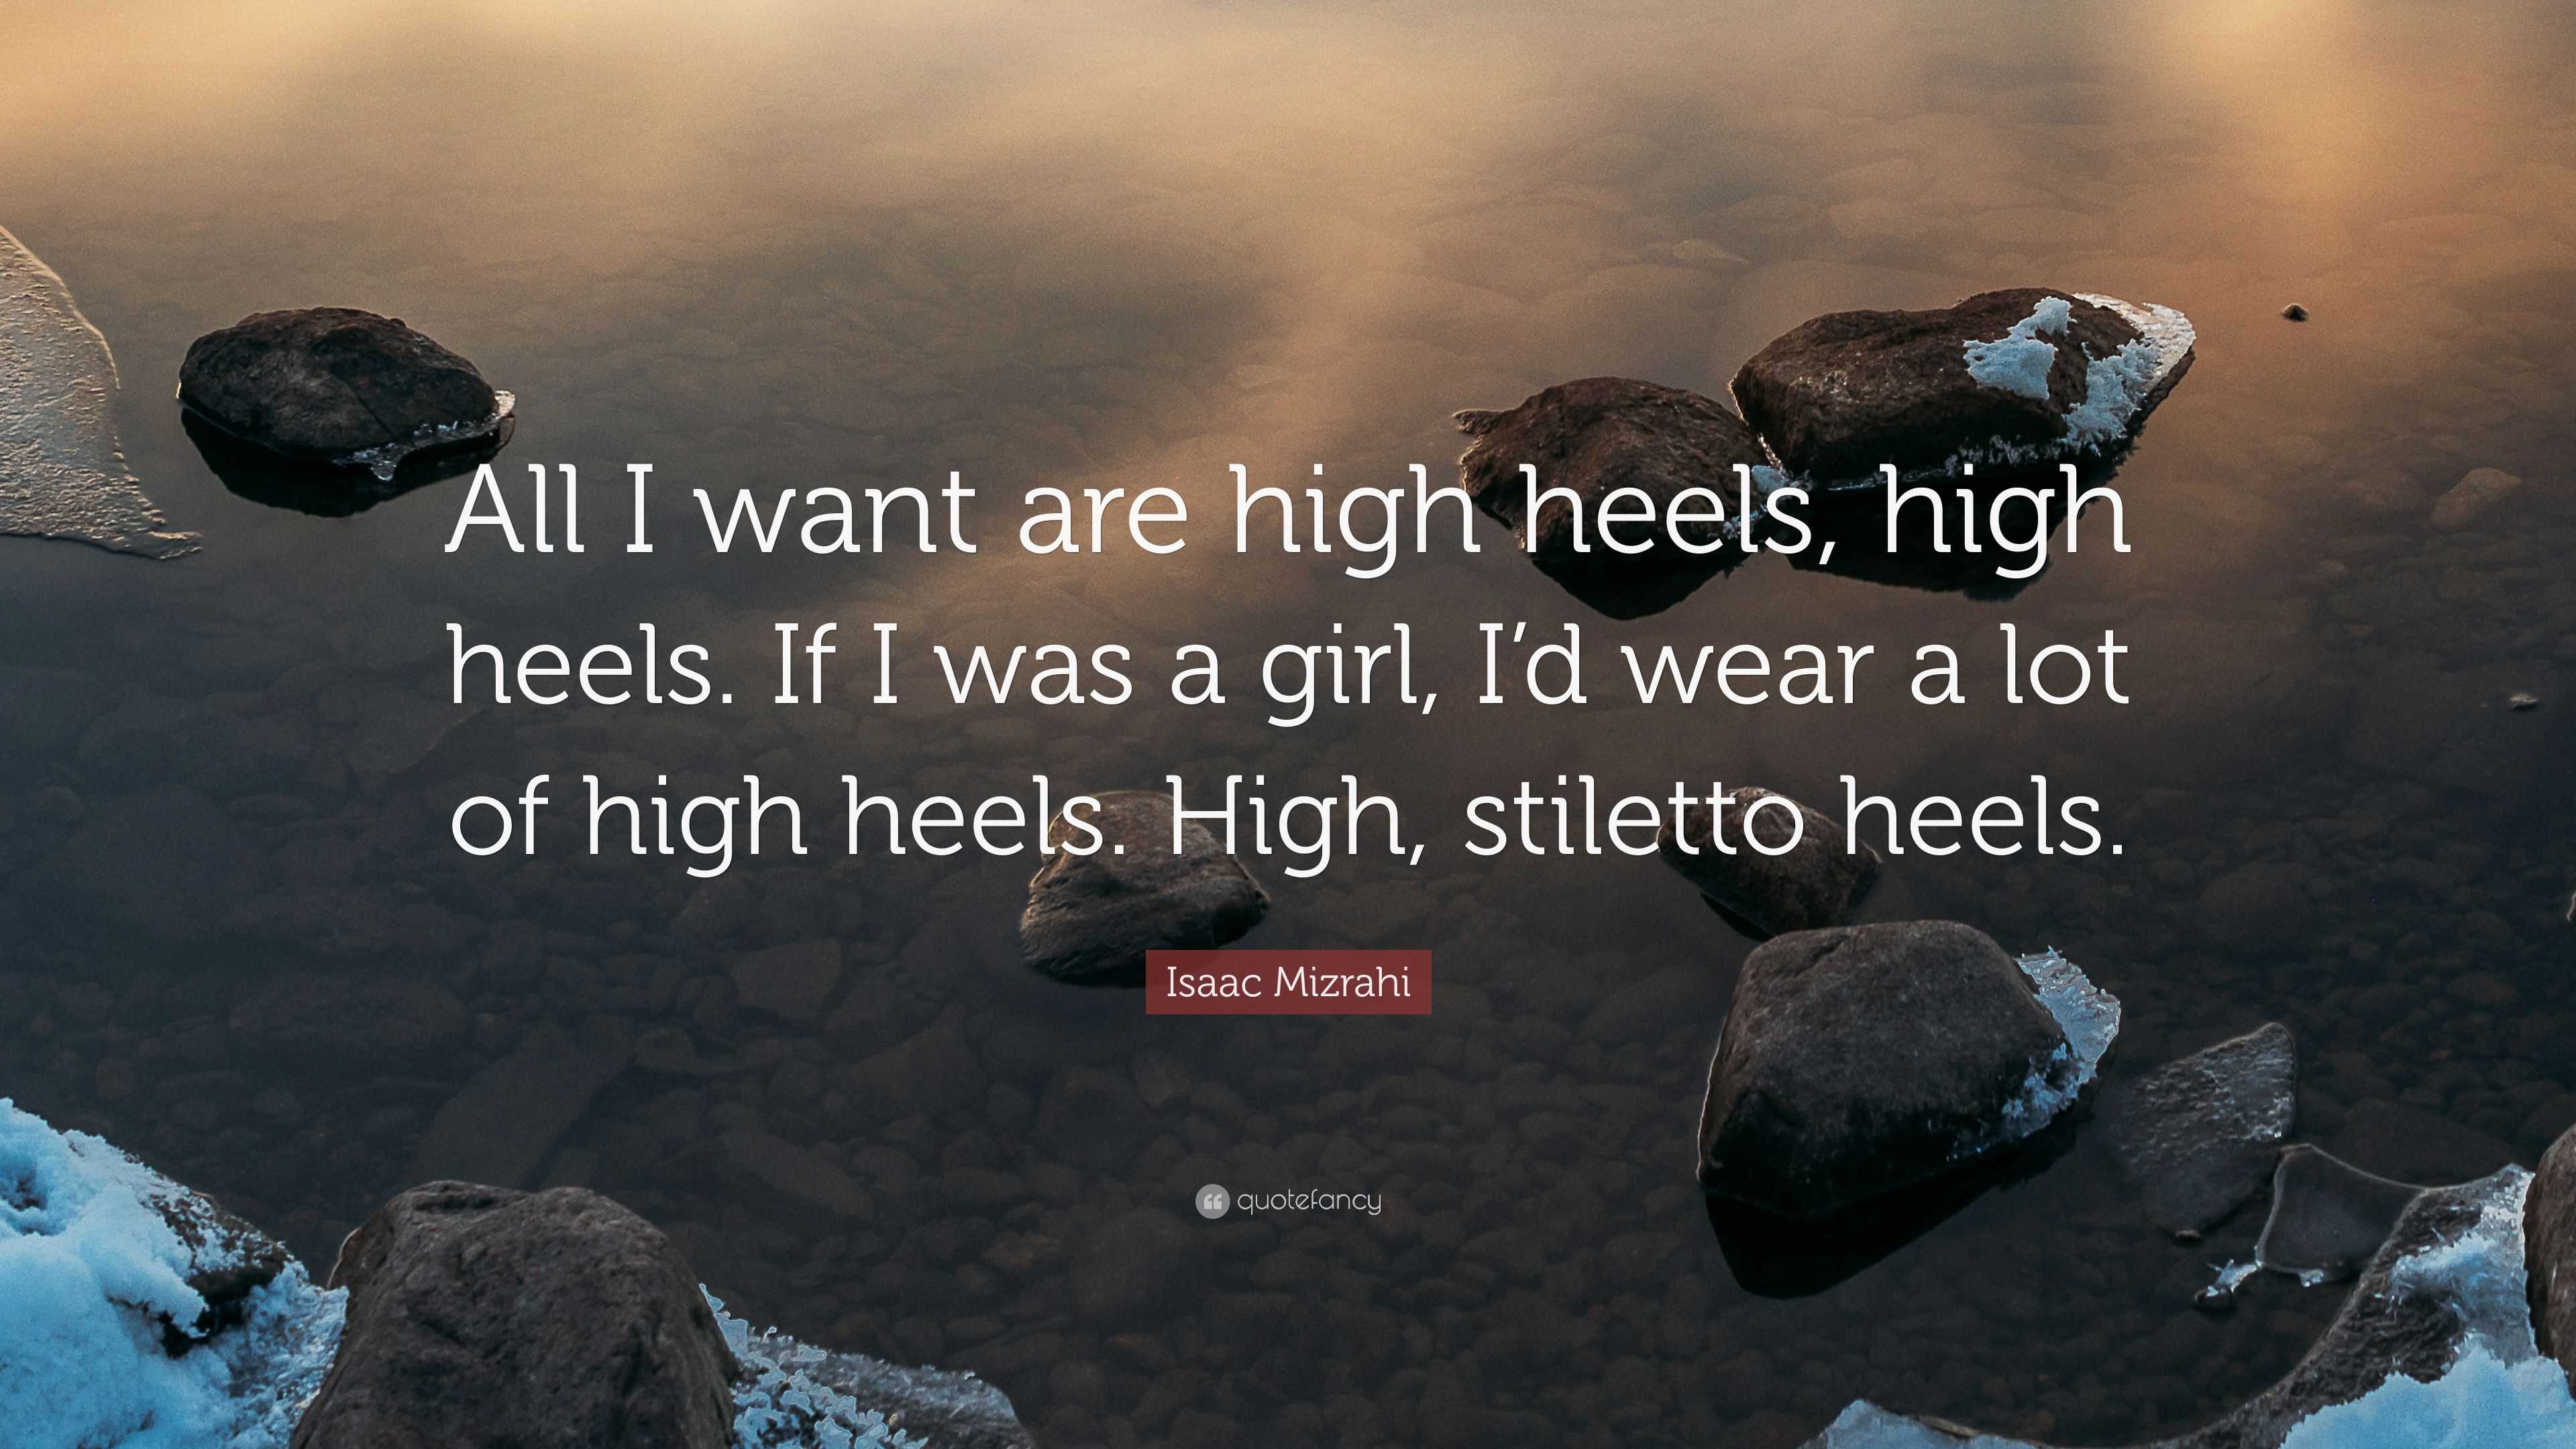 Inspiring High Heels Quotes and Sayings Story - ShoeTease Shoe Blog &  Styling Services